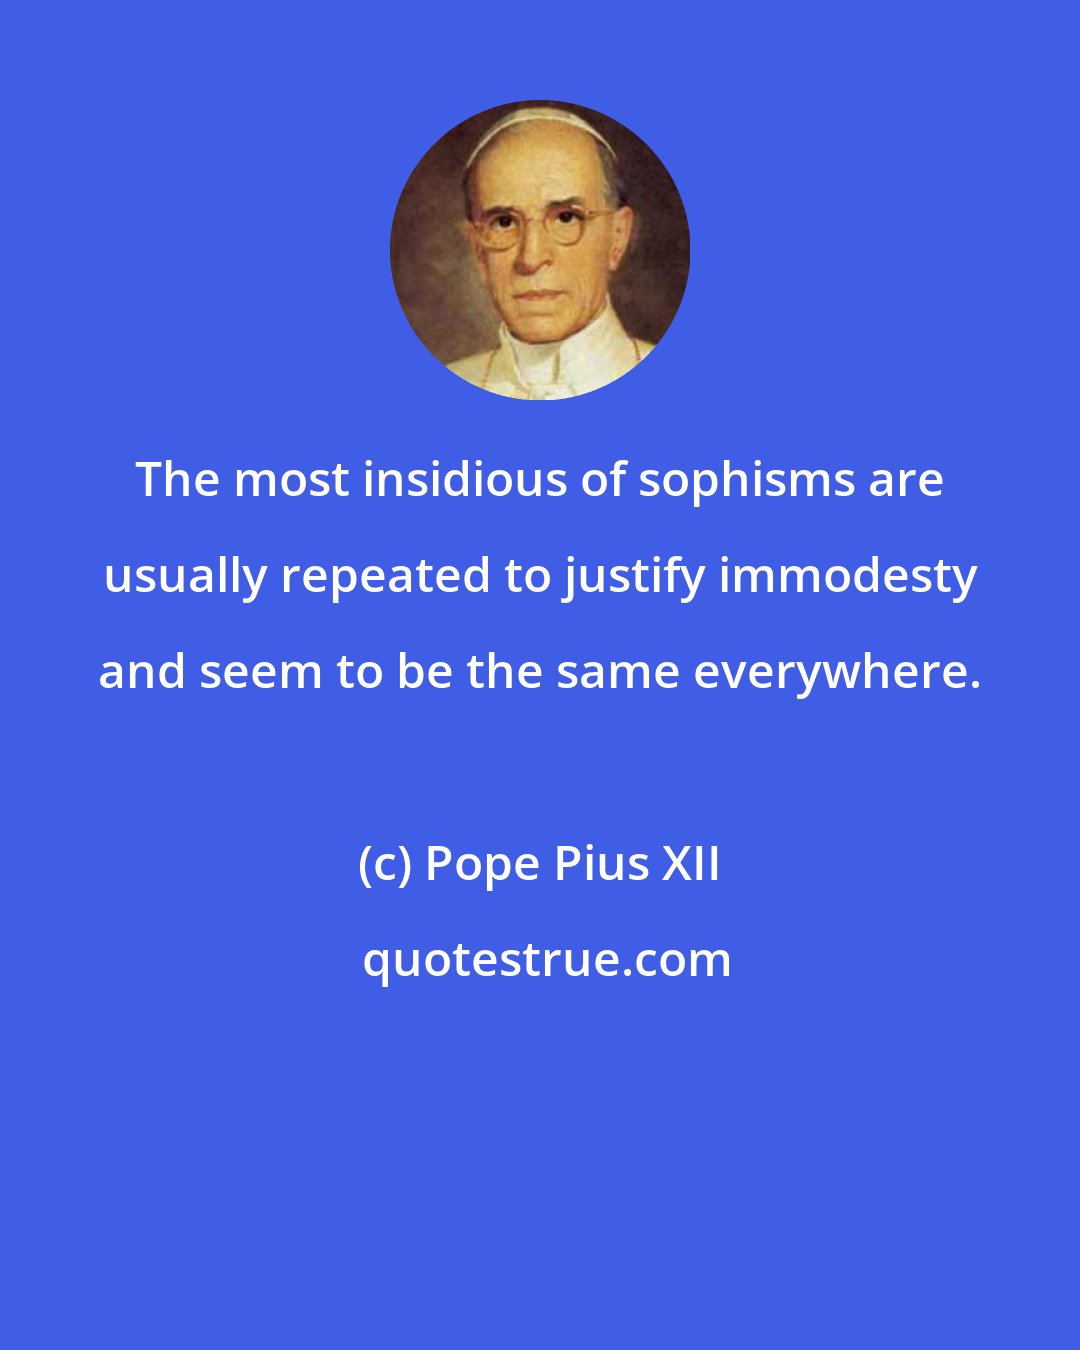 Pope Pius XII: The most insidious of sophisms are usually repeated to justify immodesty and seem to be the same everywhere.